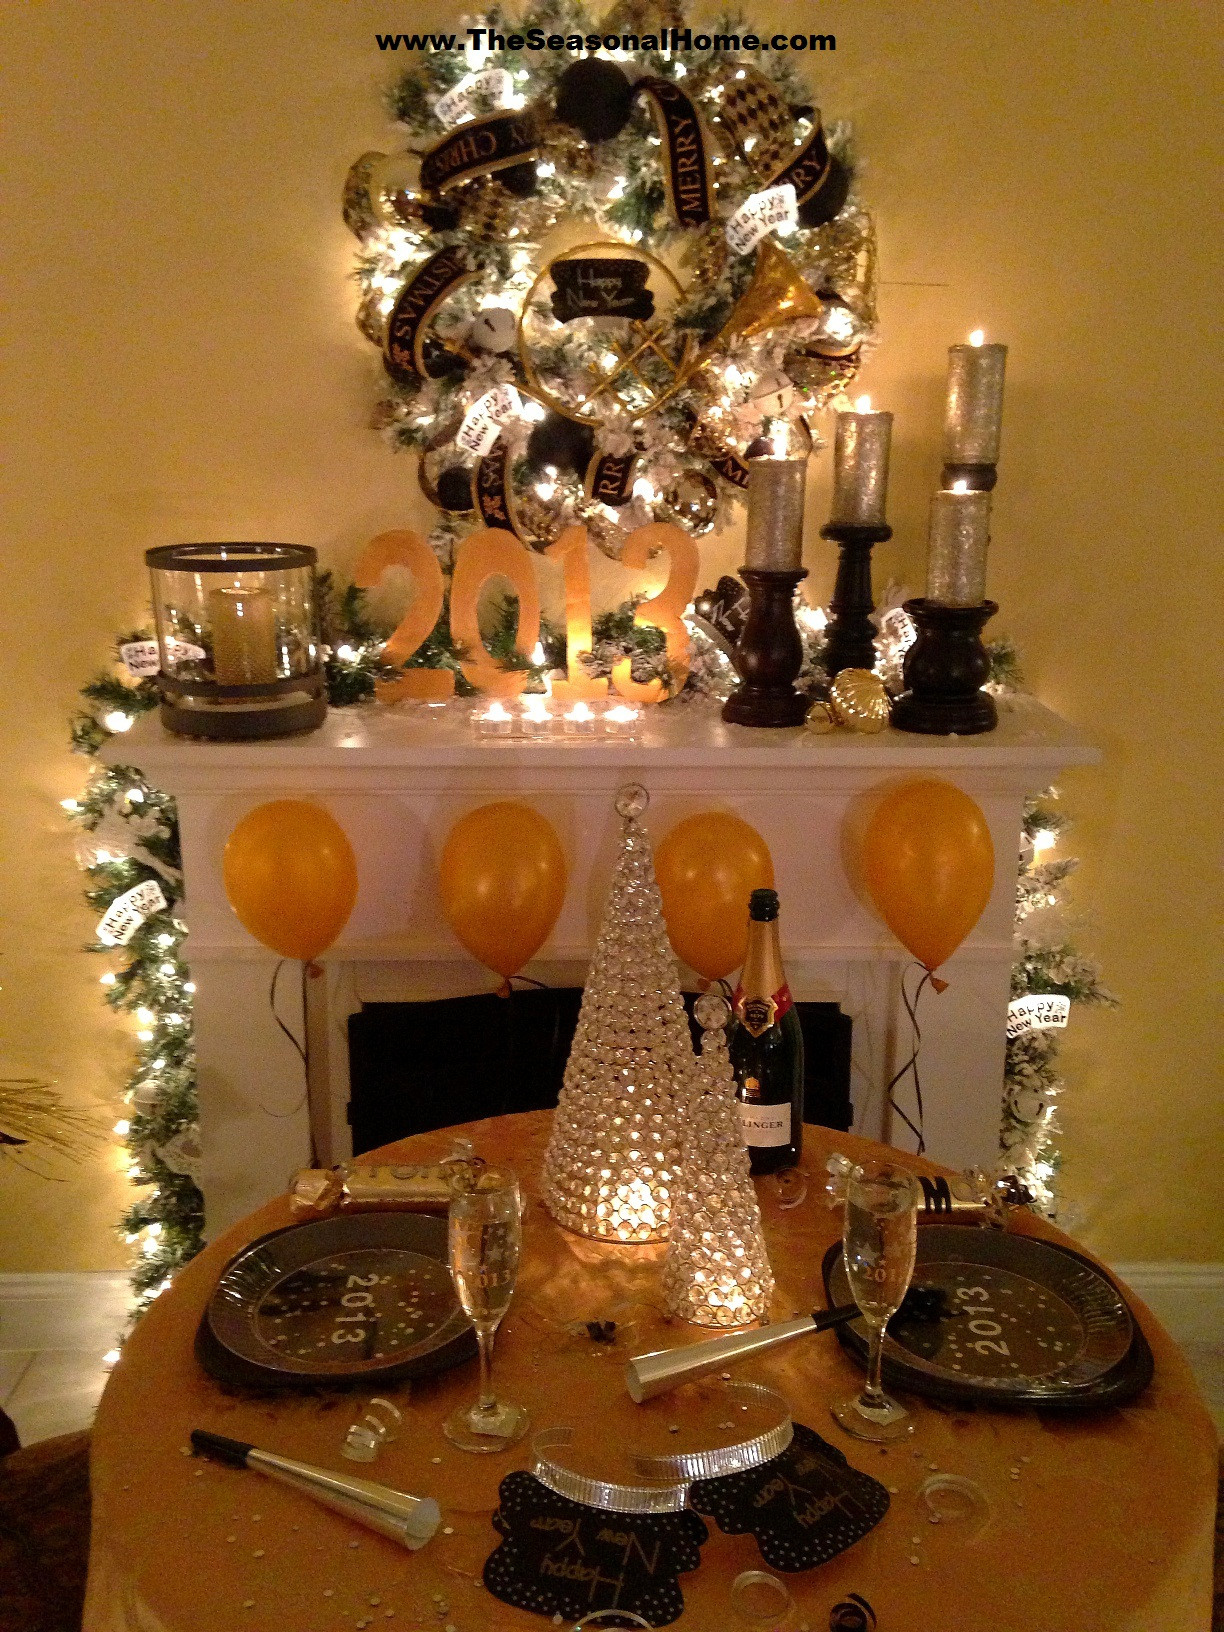 Nye Dinner Party Ideas
 Cozy New Year’s Eve Dinner Party at home The Seasonal Home